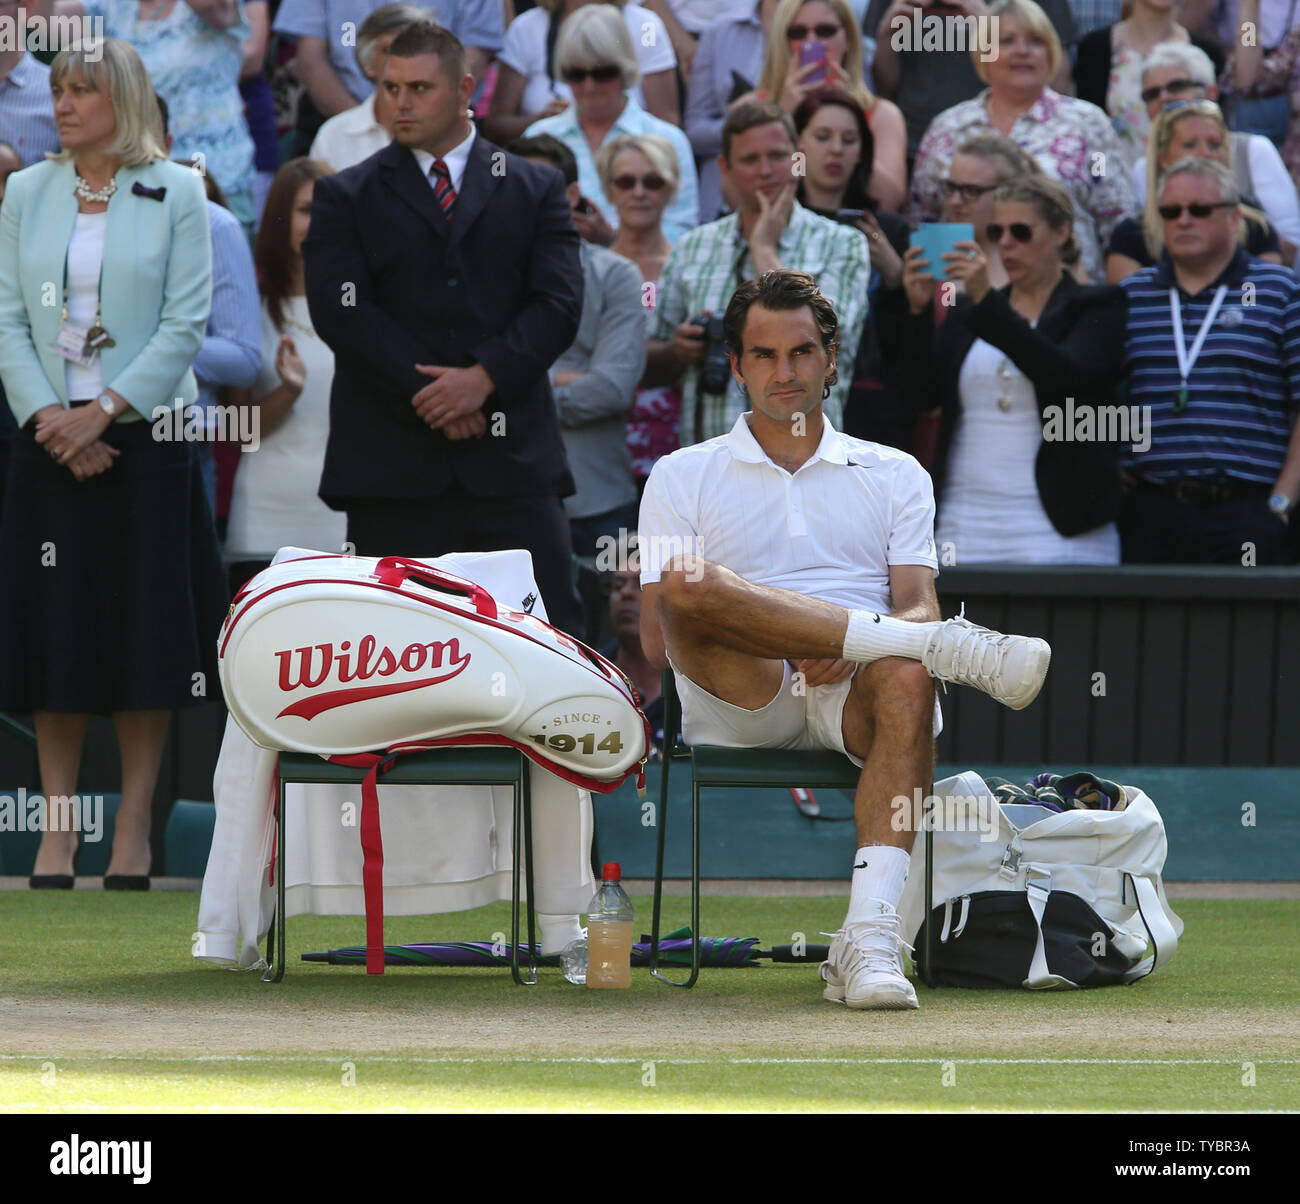 Swiss Roger Federer looks glum after defeat to Novak Djokovic at the Men's  Final of the